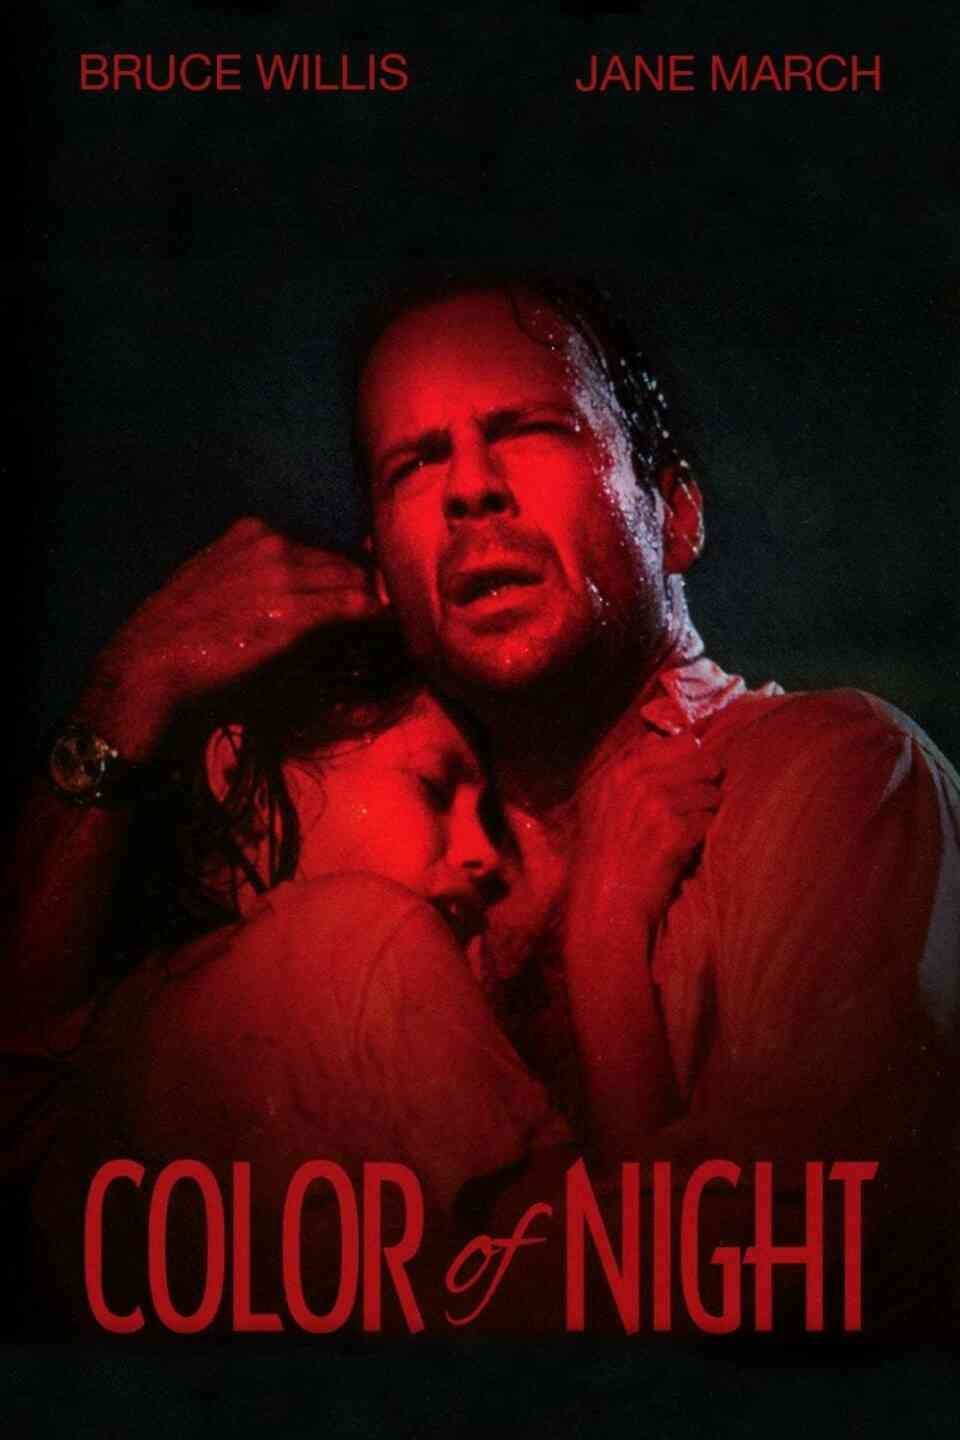 Read Color of Night screenplay (poster)